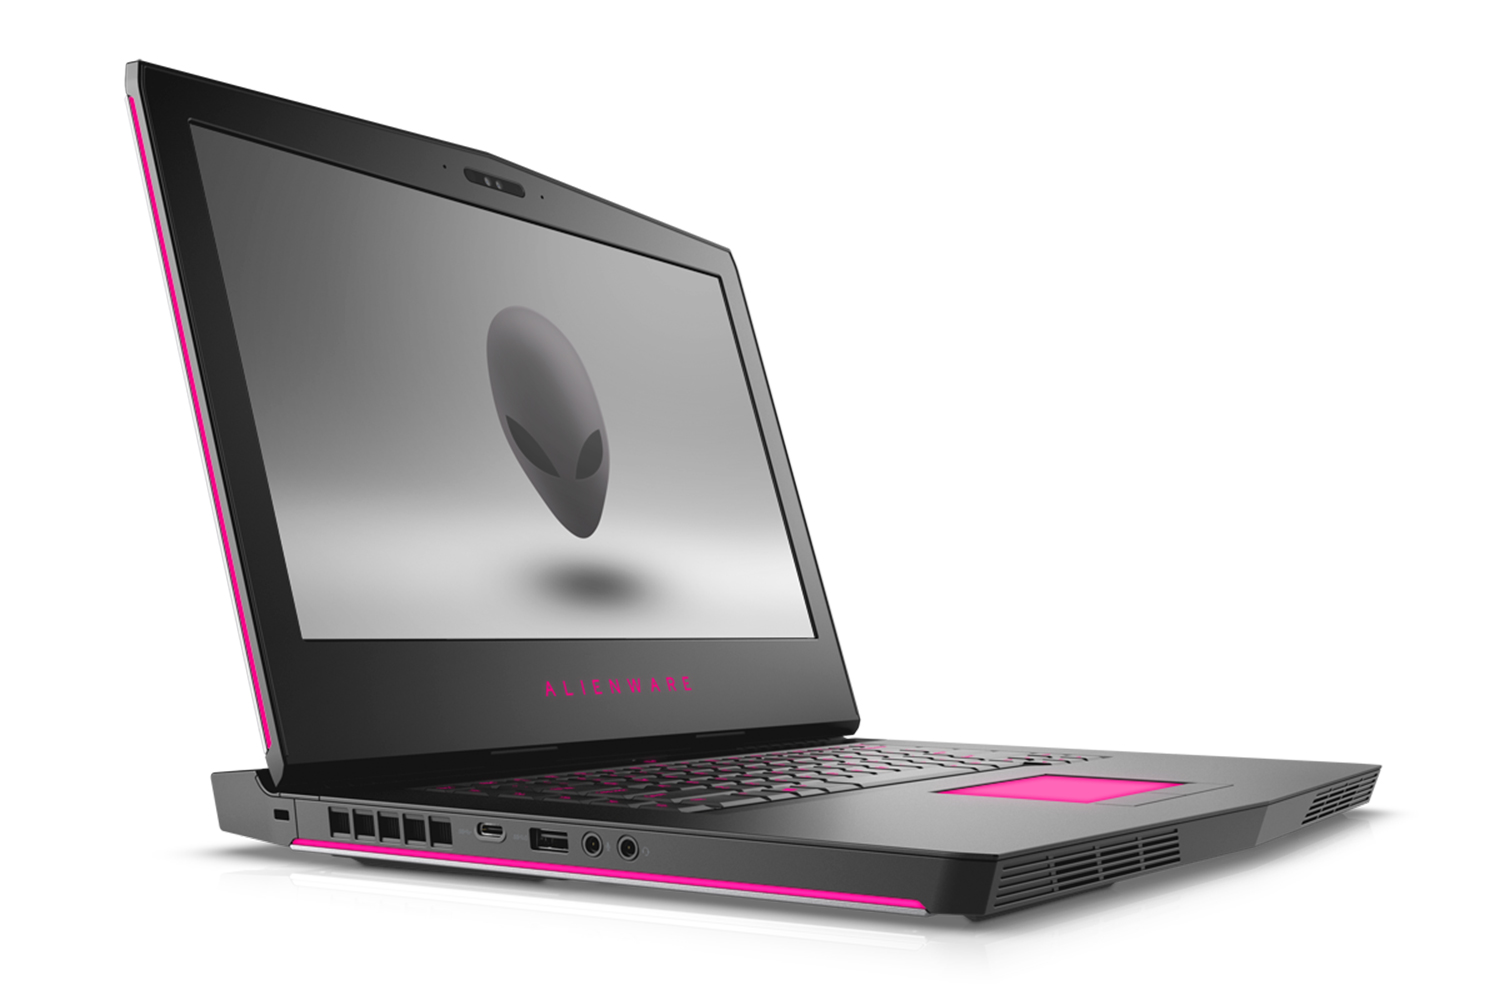 dell alienware inspiron 7000 gaming laptops refresh intel seventh gen cpu aw 15 03